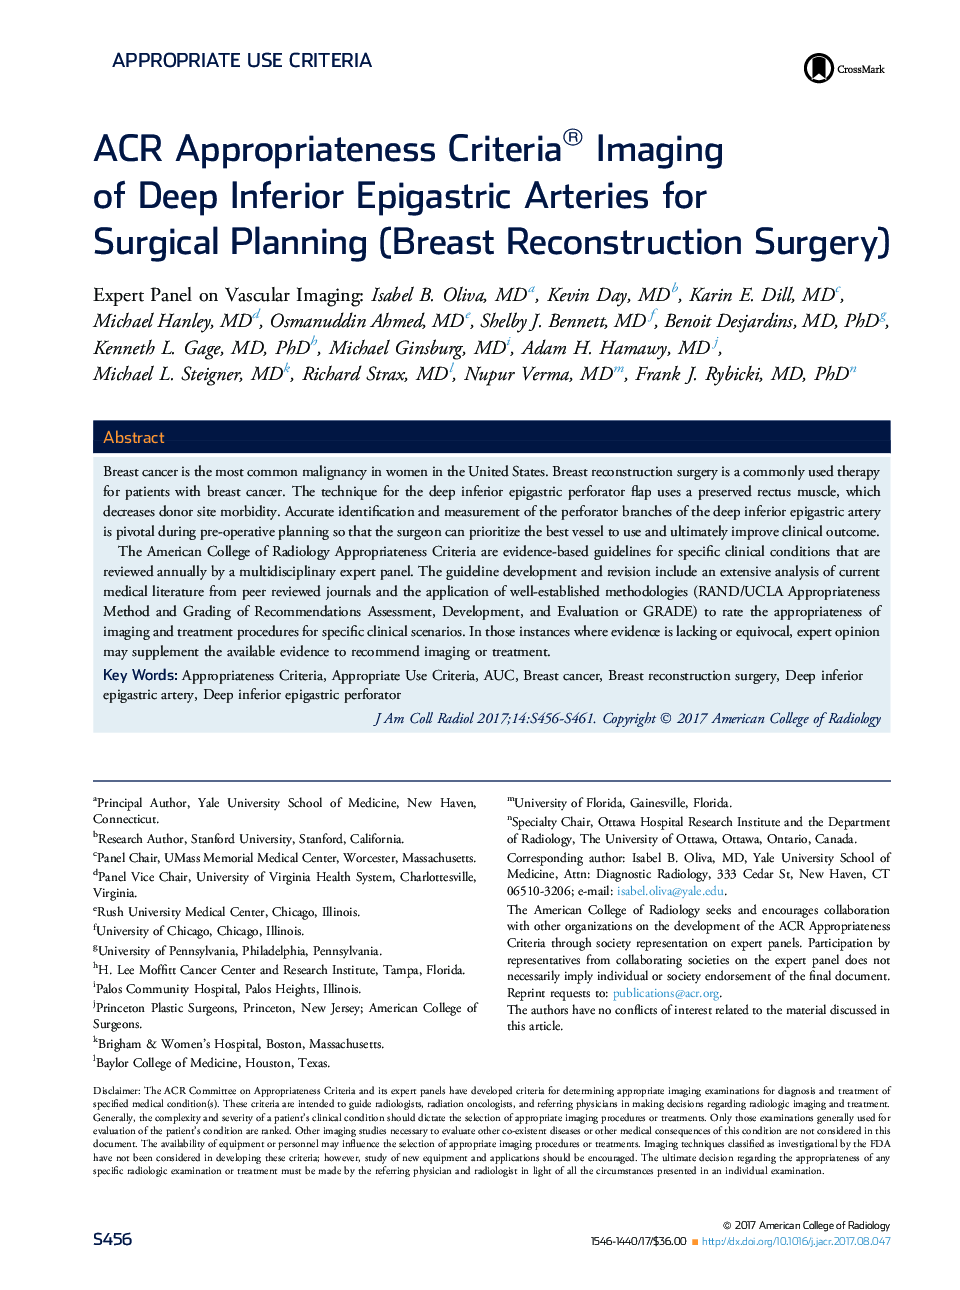 ACR Appropriateness Criteria® Imaging of Deep Inferior Epigastric Arteries for Surgical Planning (Breast Reconstruction Surgery)